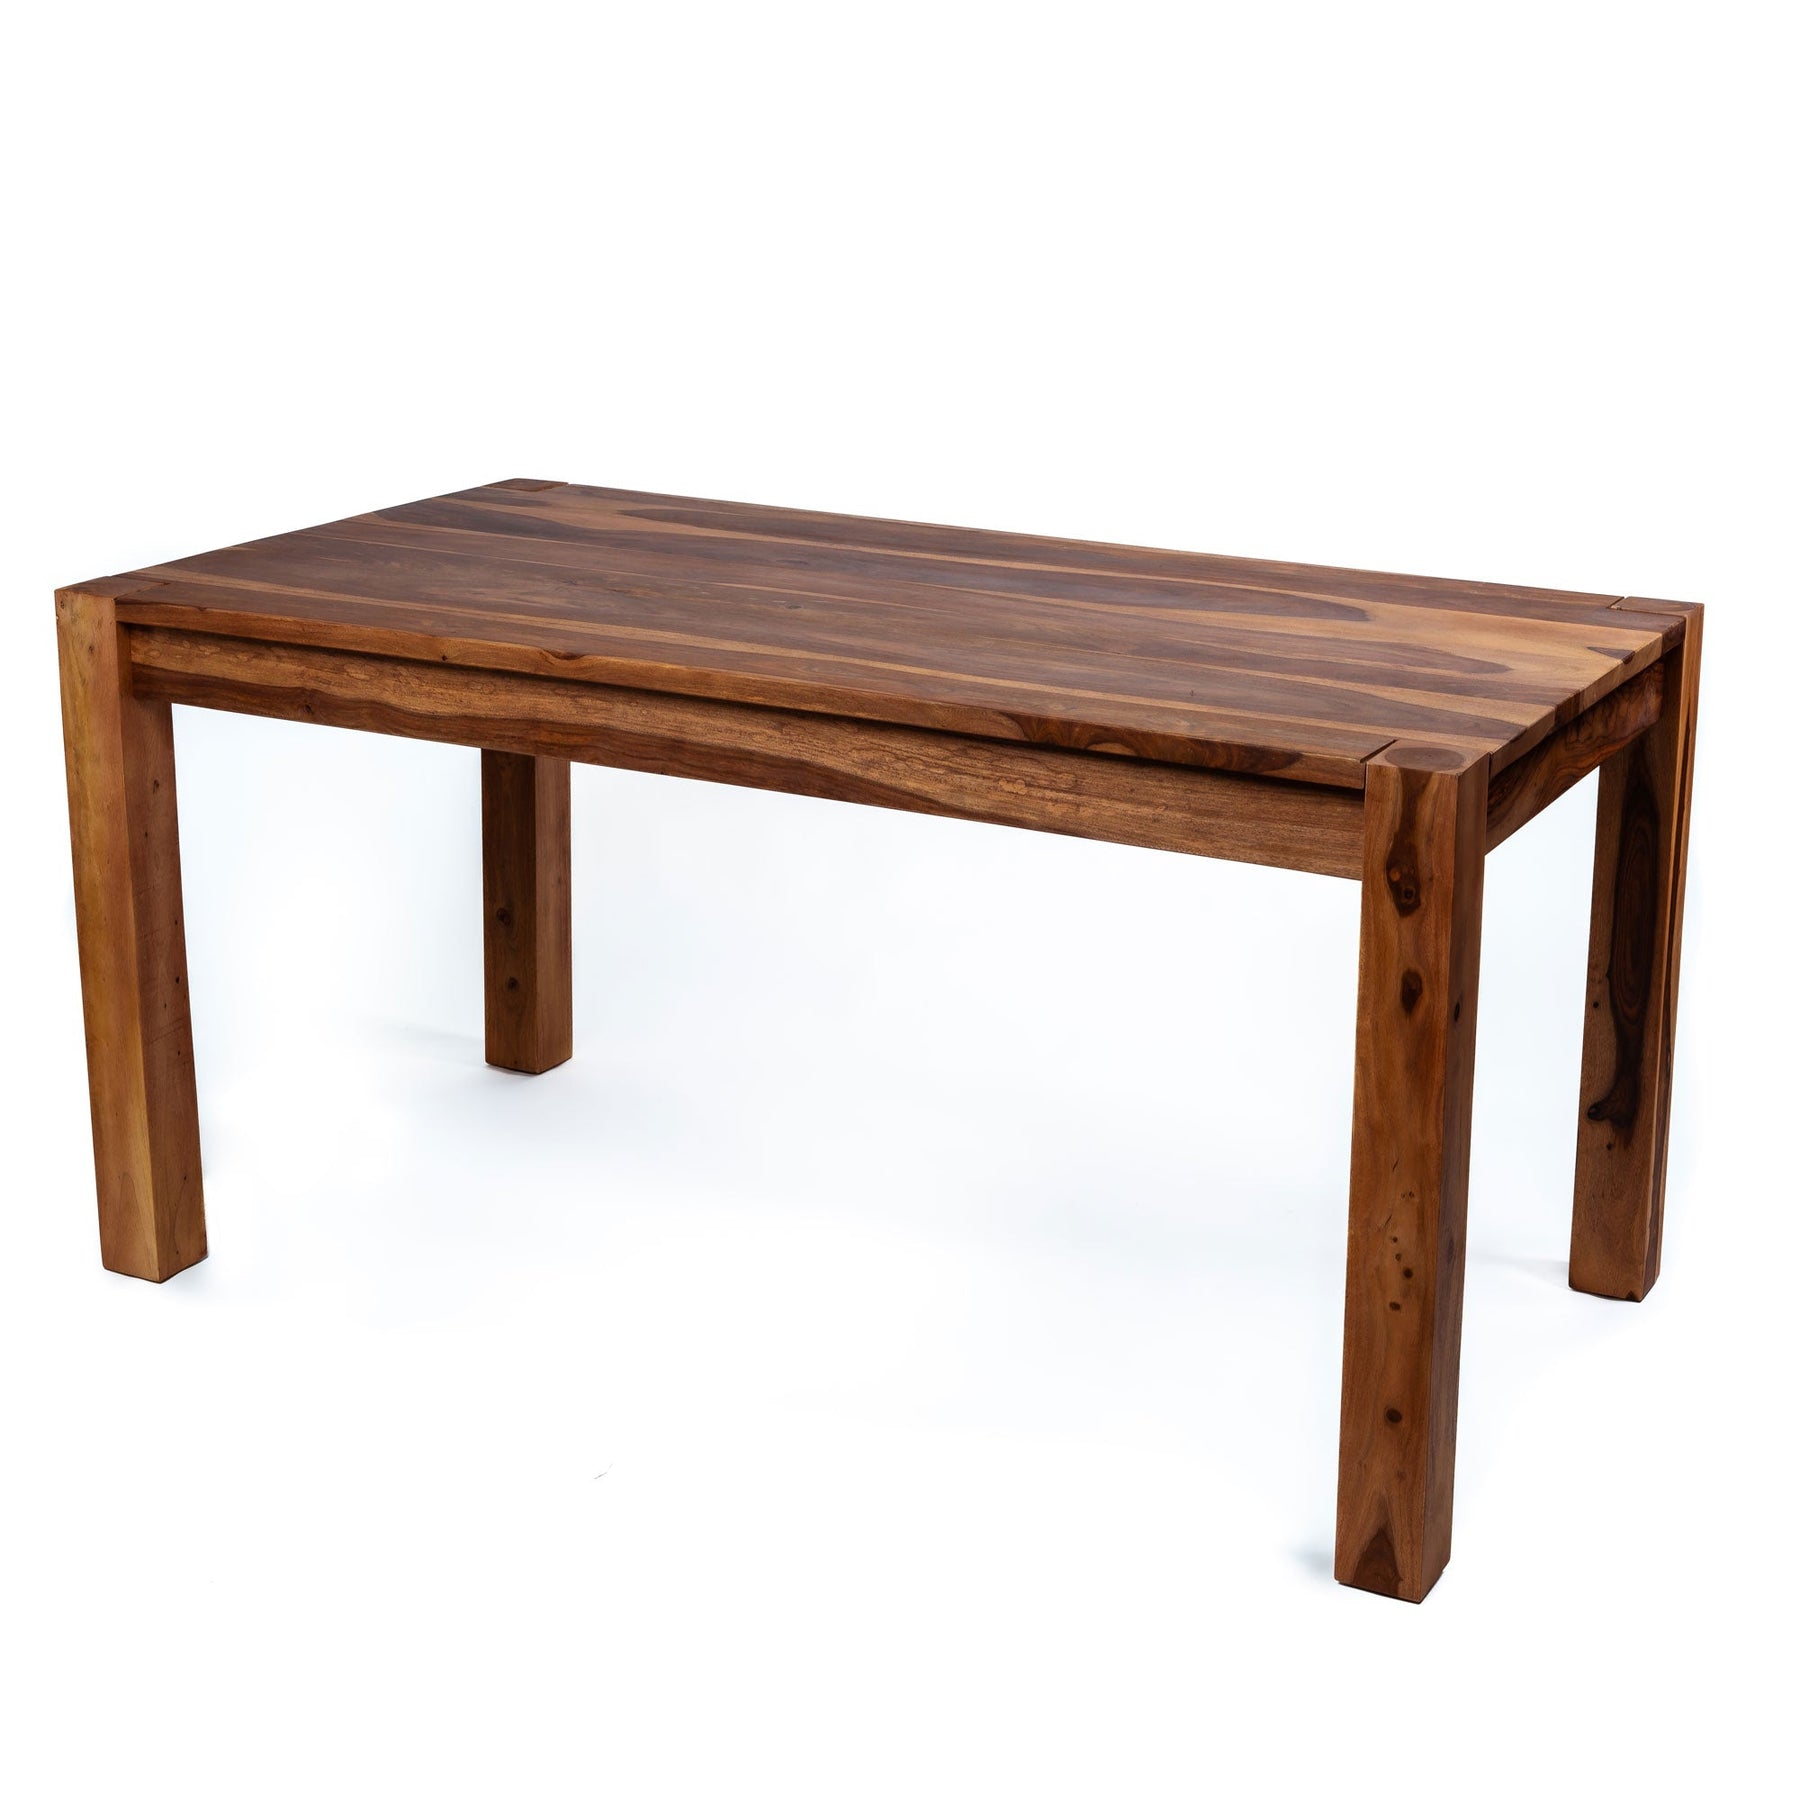 Zen Dining Table | Wooden Dining Room Table | Rectangular Dining Table | 4 Sizes Available